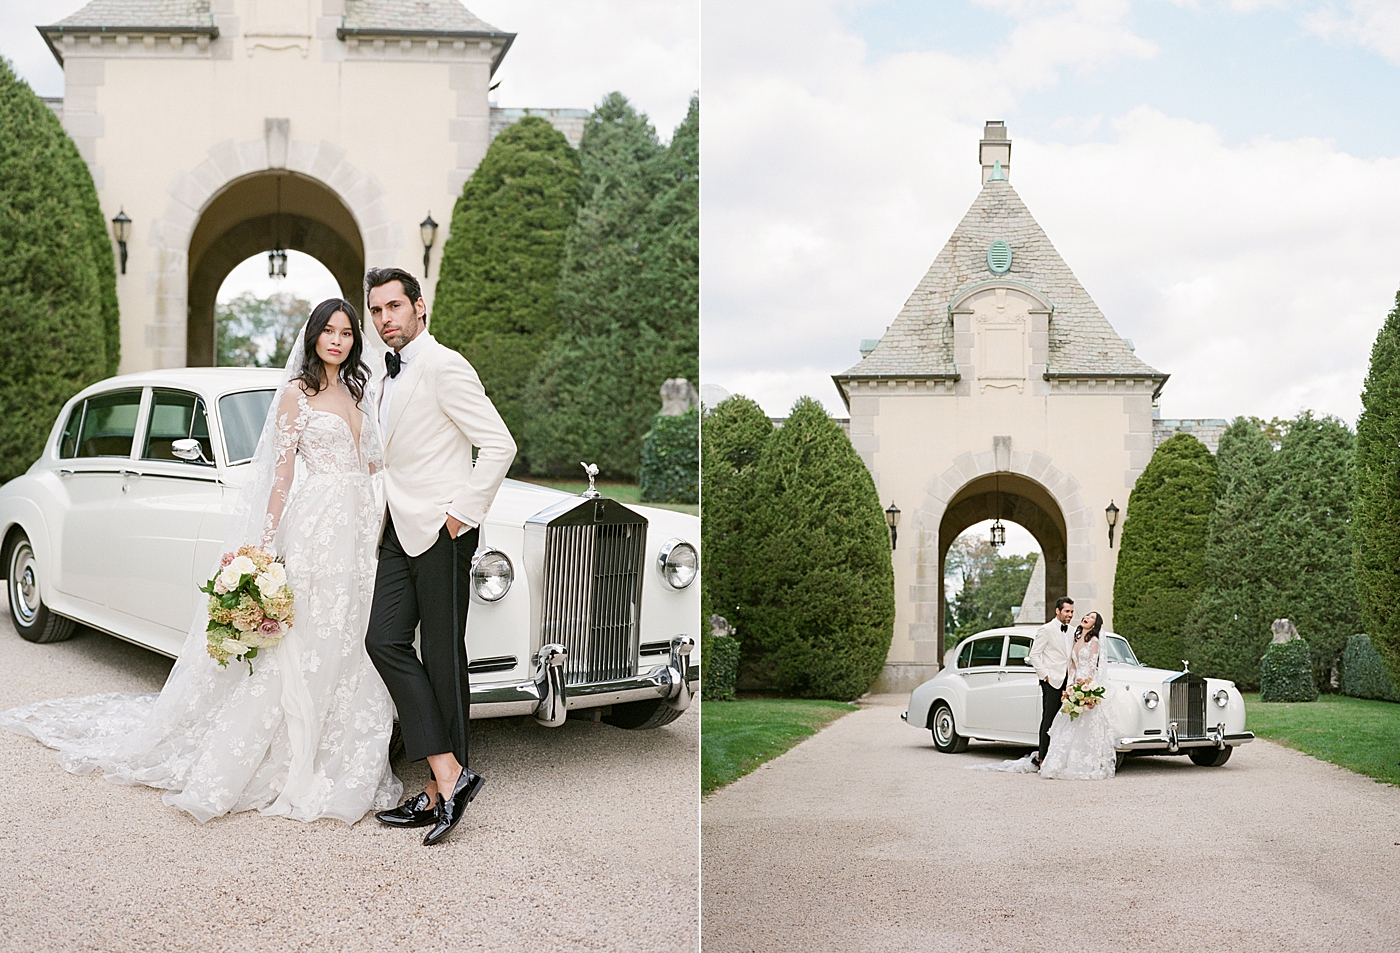 Side-by-side images of a bride leaning on a classic car and embracing in a gravel driveway during Oheka castle wedding | Image by Hope Helmuth Photography